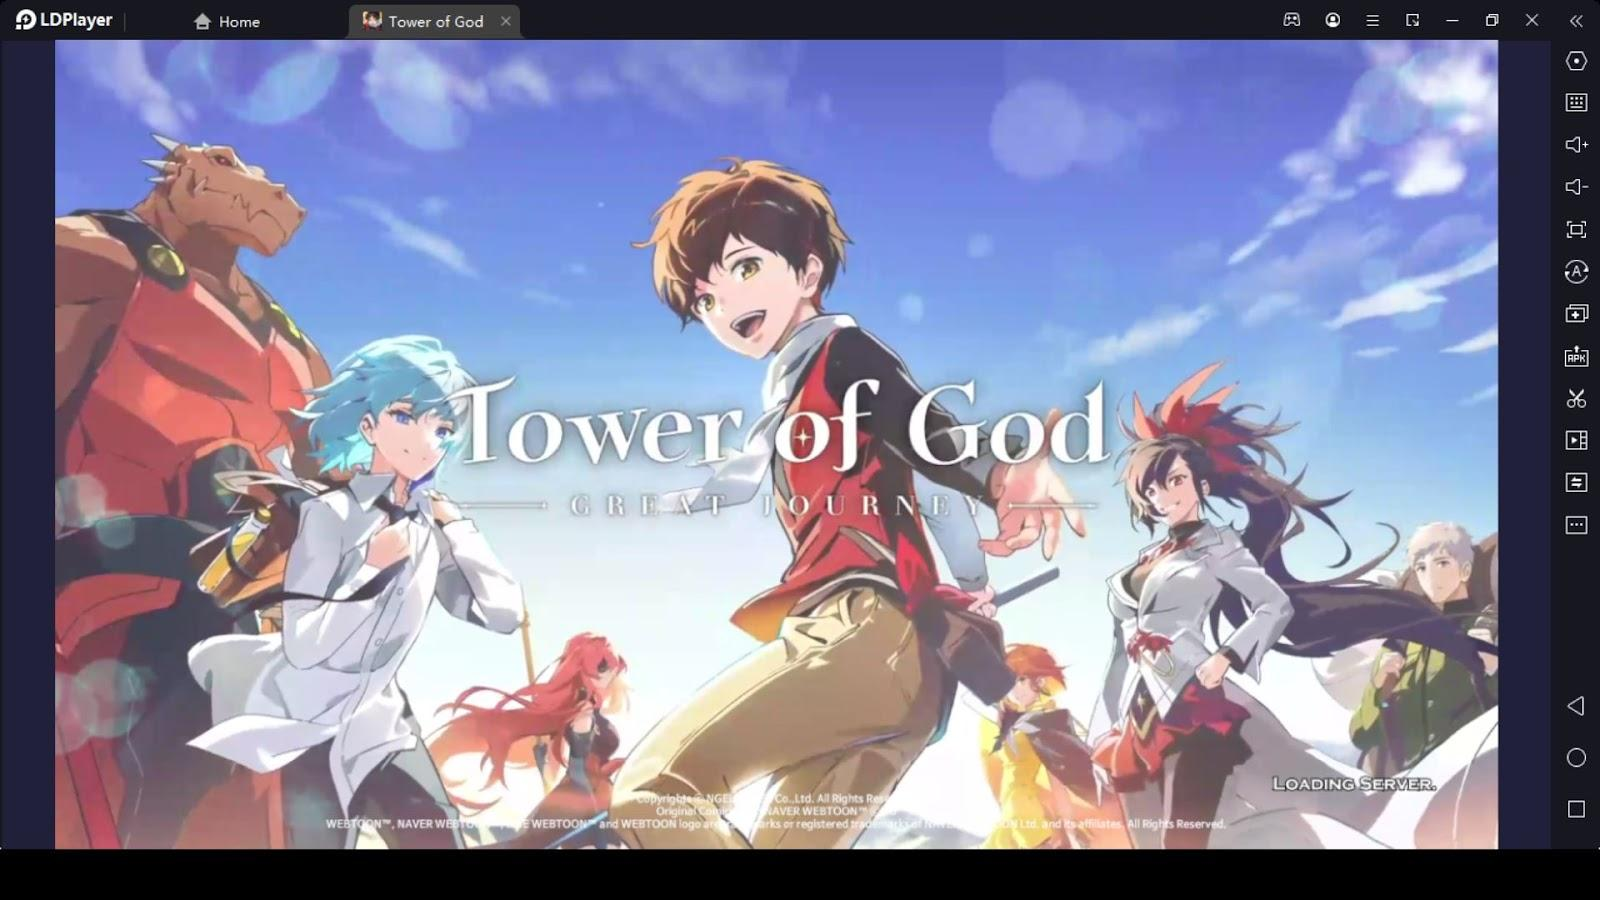 Tower of God: Great Journey - Apps on Google Play